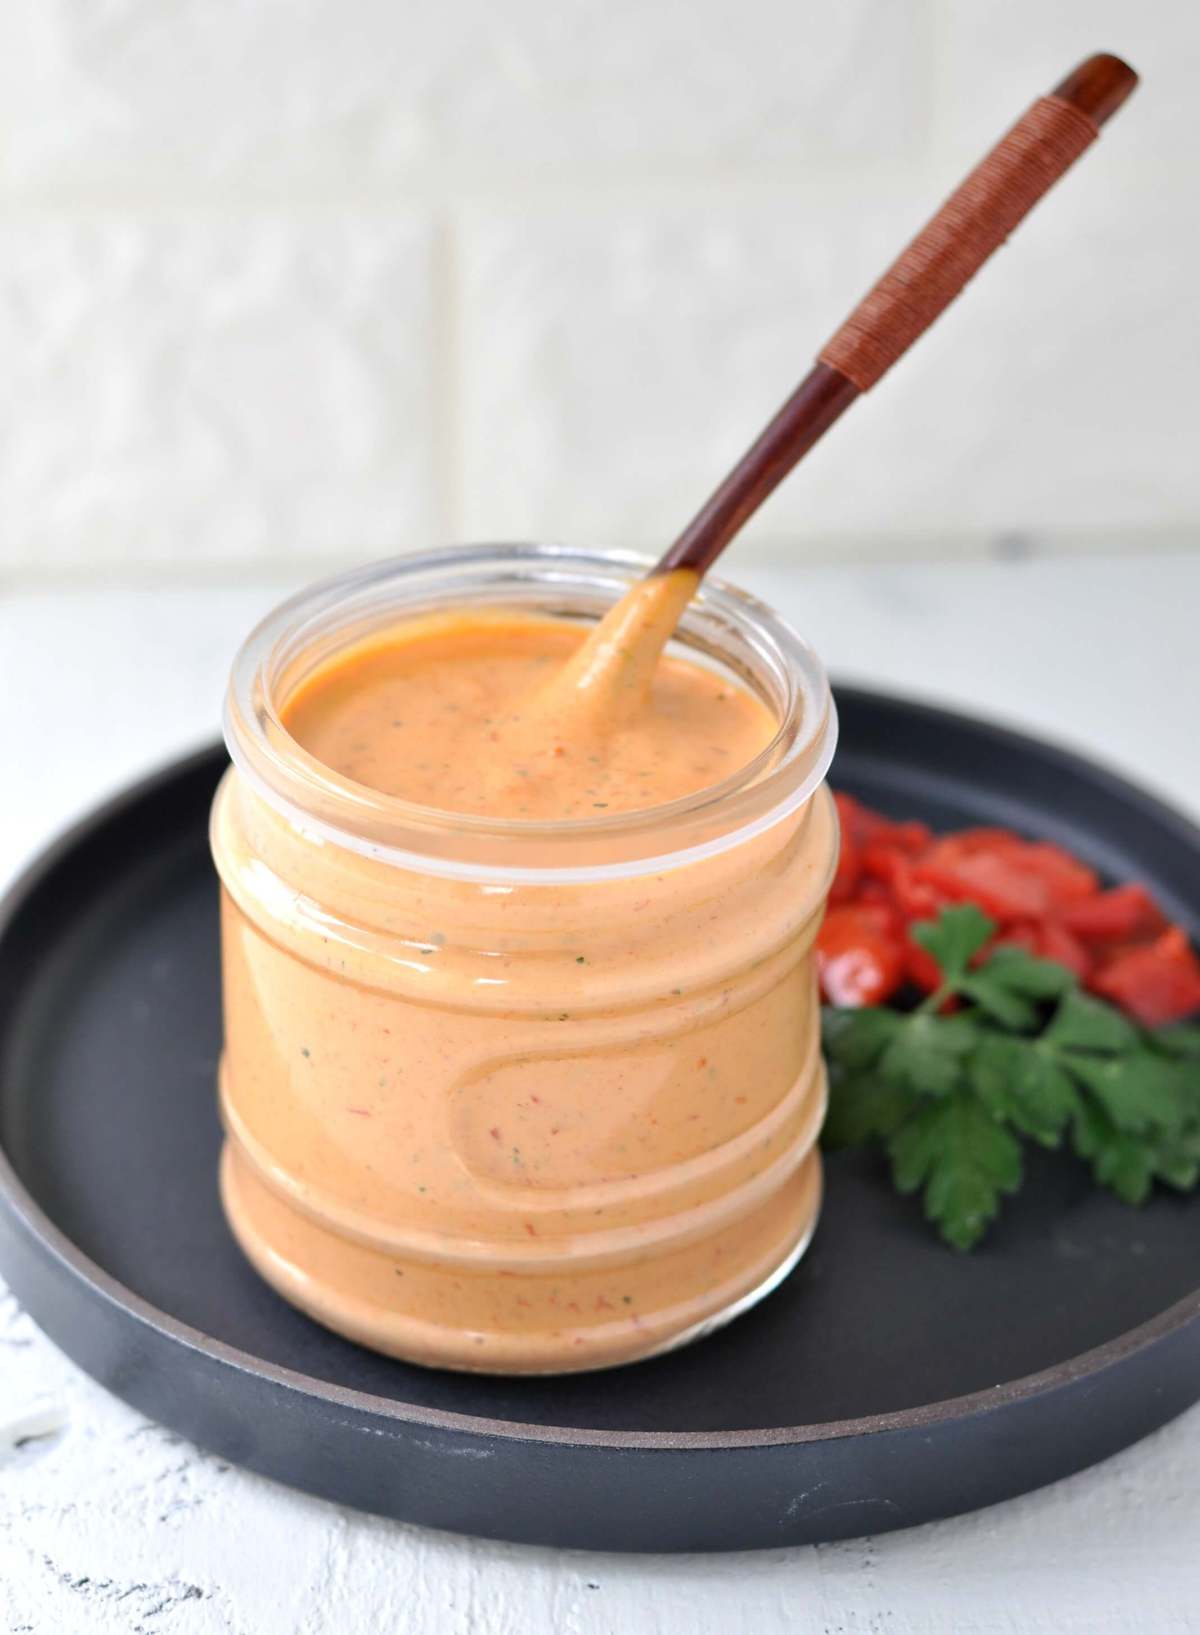 a jar of roasted red pepper aioli, served with a spoon. Roasted peppers and fresh parsley on the side as a garnish